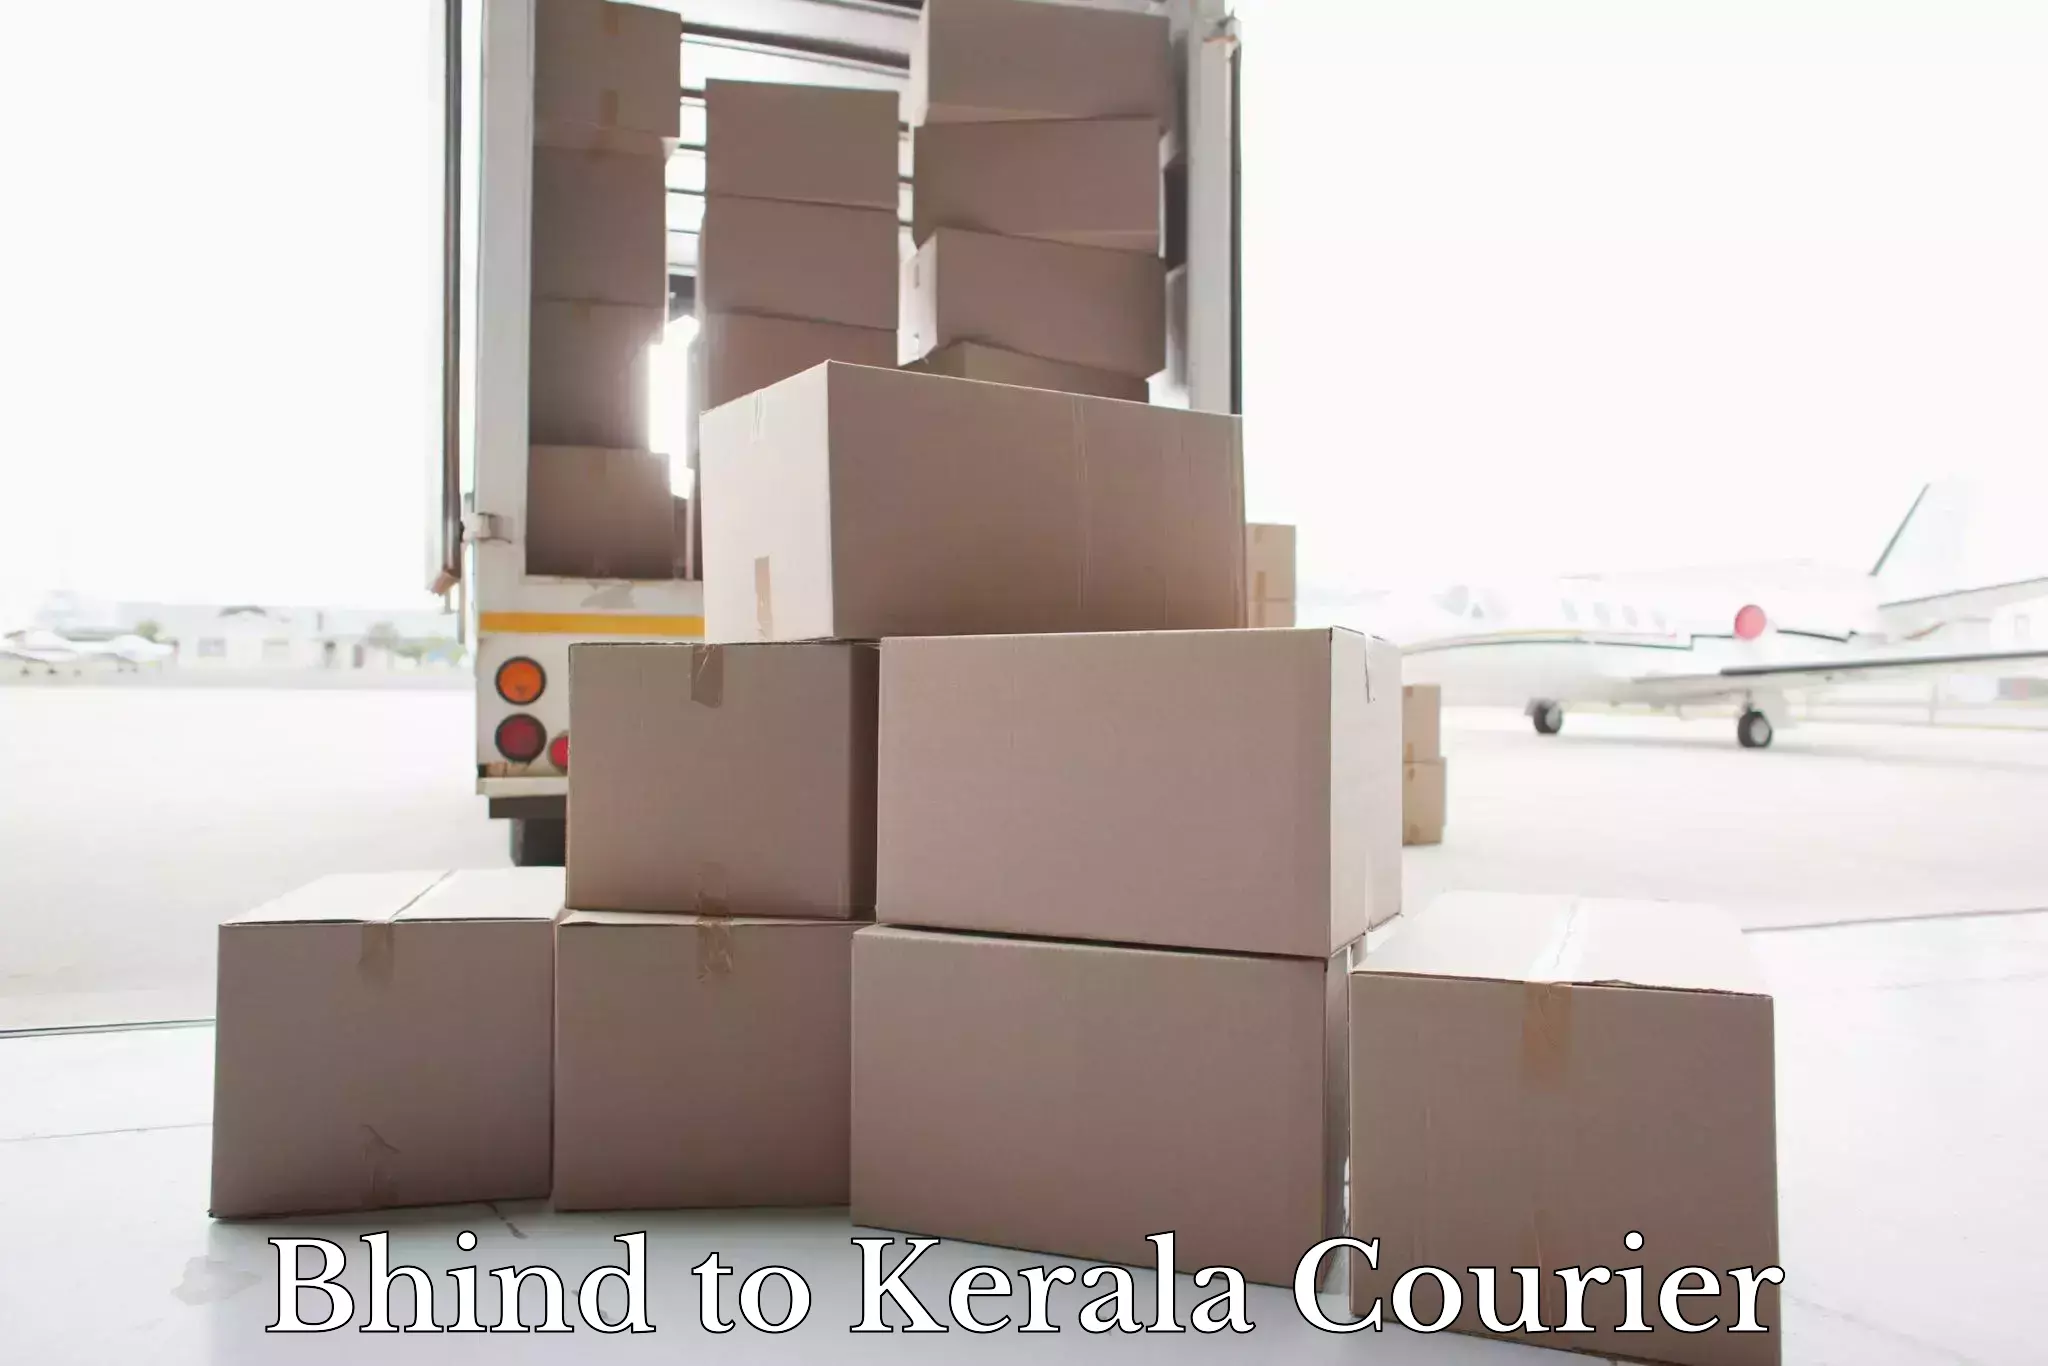 Baggage delivery technology Bhind to Kerala